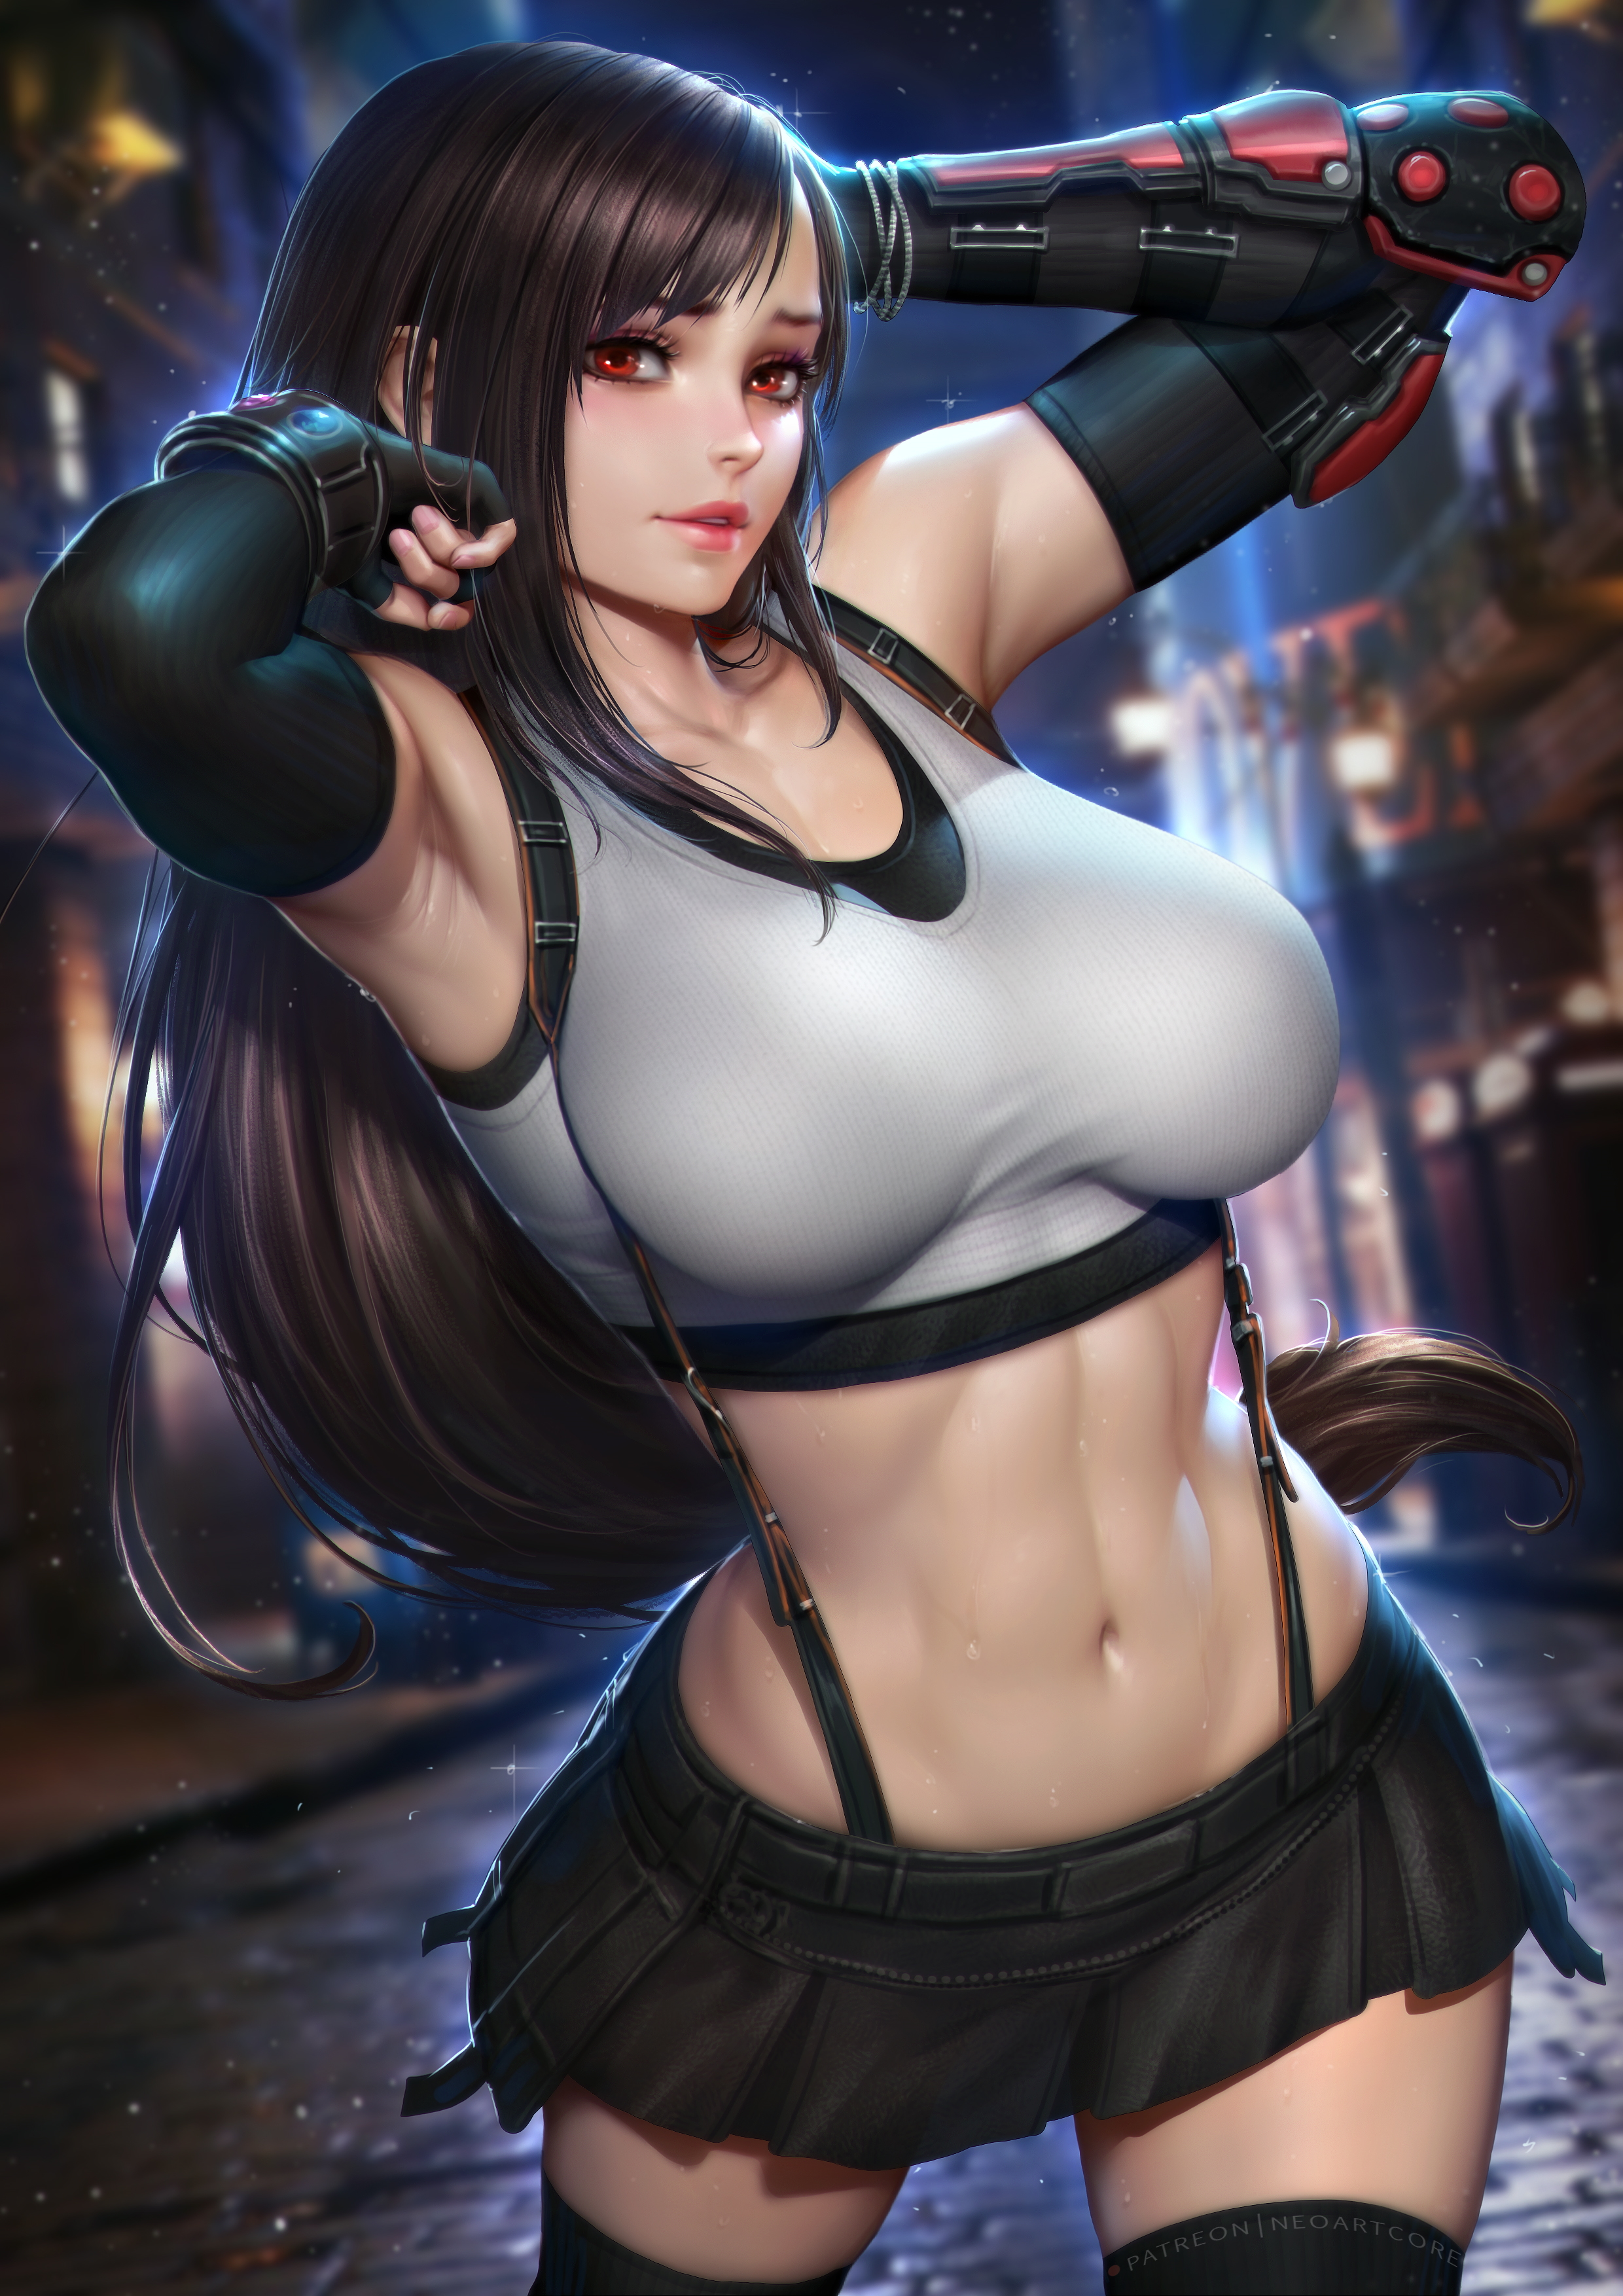 General 2480x3508 Tifa Lockhart Final Fantasy Final Fantasy VII Final Fantasy VII: Advent Children video games video game characters video game girls fantasy girl women brunette long hair red eyes looking at viewer belly miniskirt thigh-highs wide hips curvy portrait display artwork illustration drawing fan art NeoArtCorE (artist)